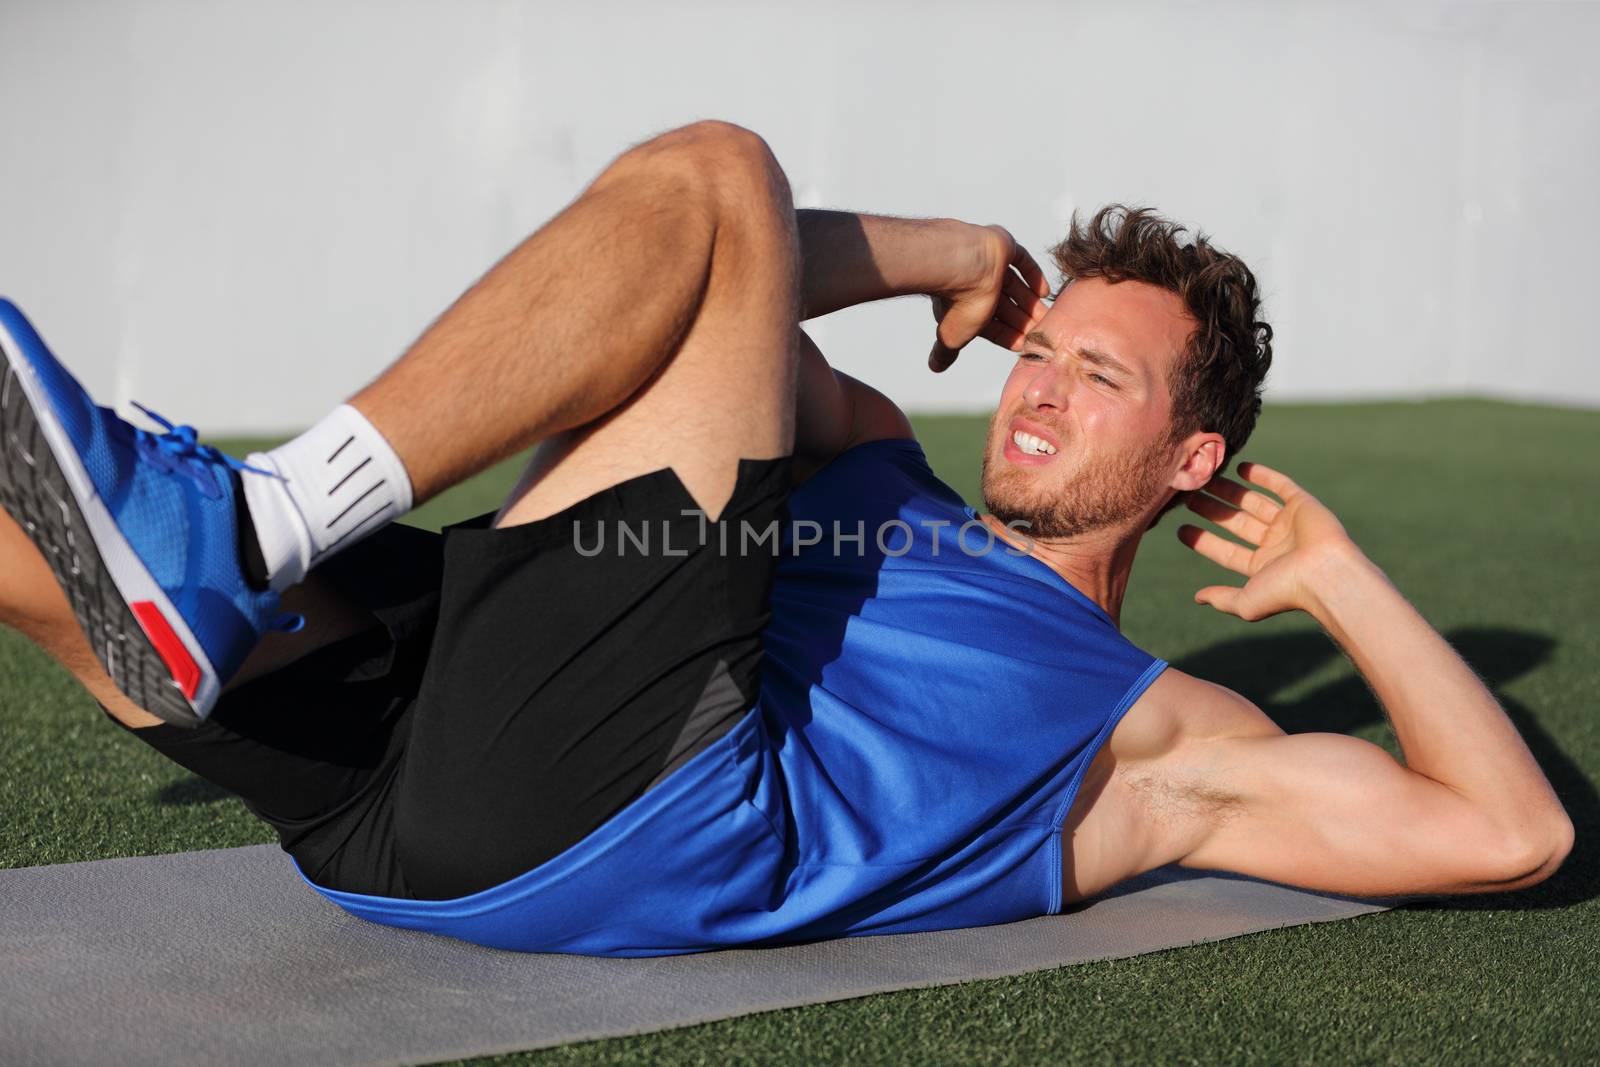 Sit ups - fitness man exercising oblique abs workout with bicycle situps outside in grass in summer. Fit male athlete working out cross training in summer. Caucasian muscular sports model in his 20s.